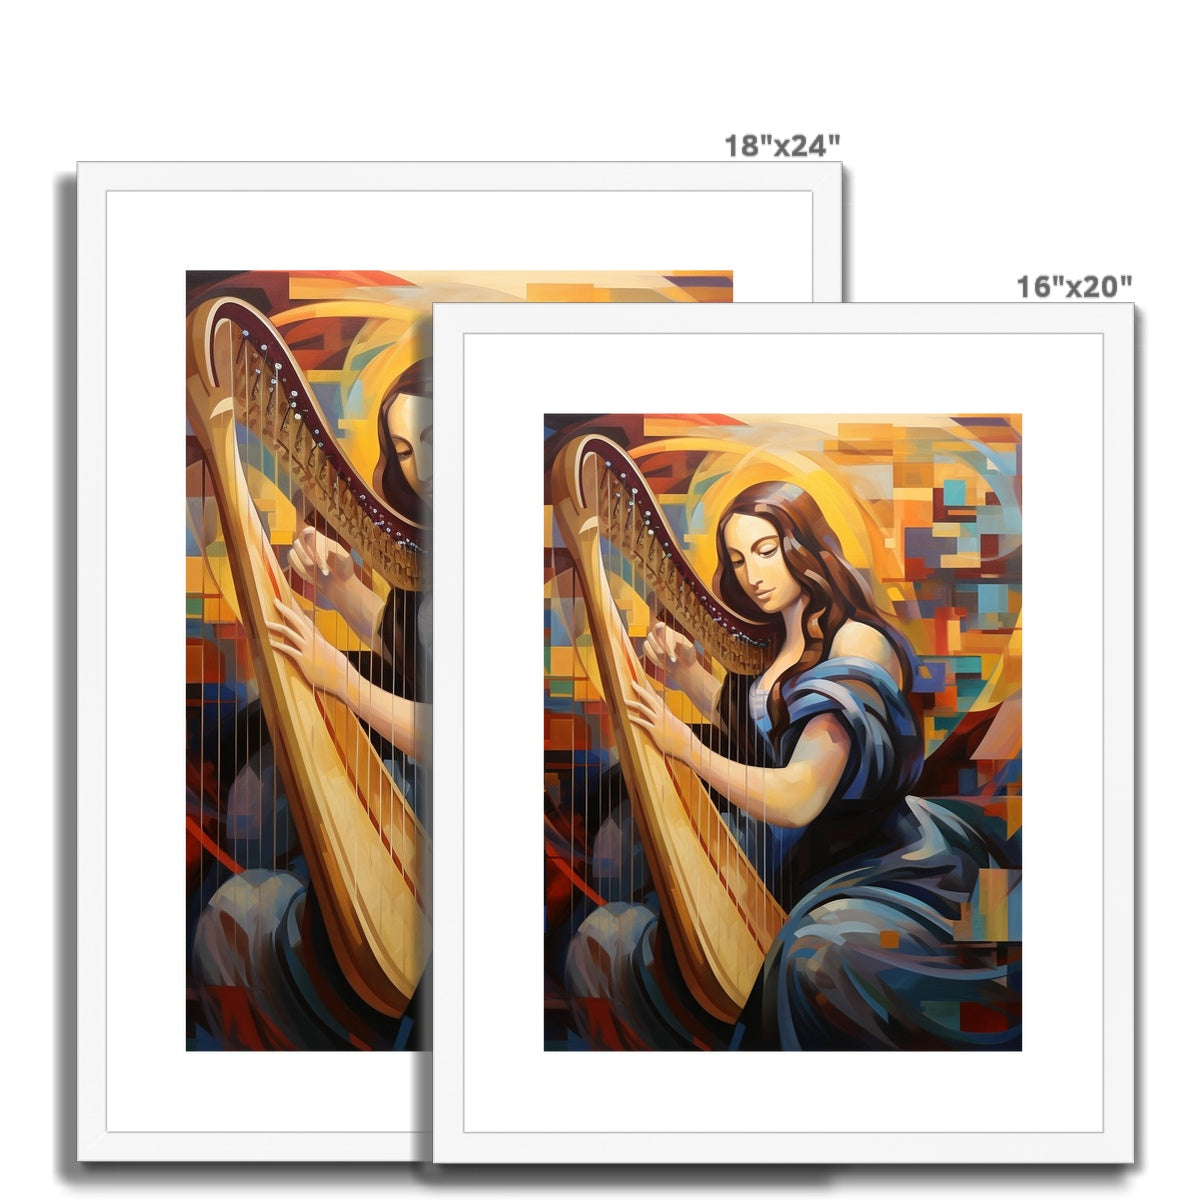 Harp Playing Mona Lisa: Limited Edition Framed & Mounted Print